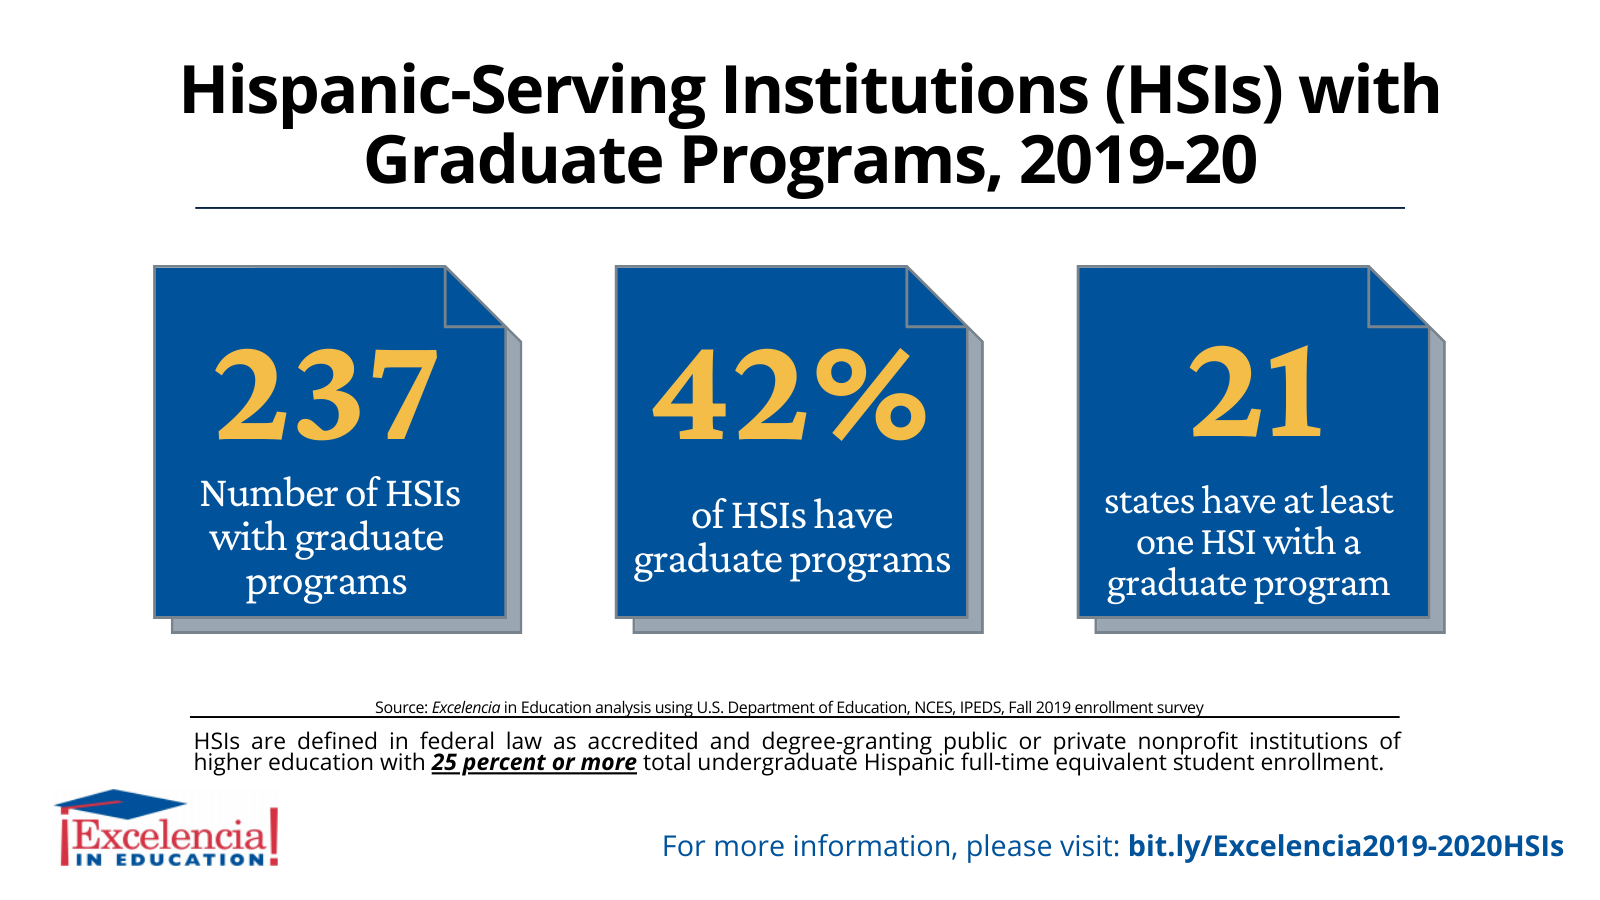 Infographic-Hispanic-Serving Institutions with Graduate Programs (gHSIs) 2019-2020: Overview